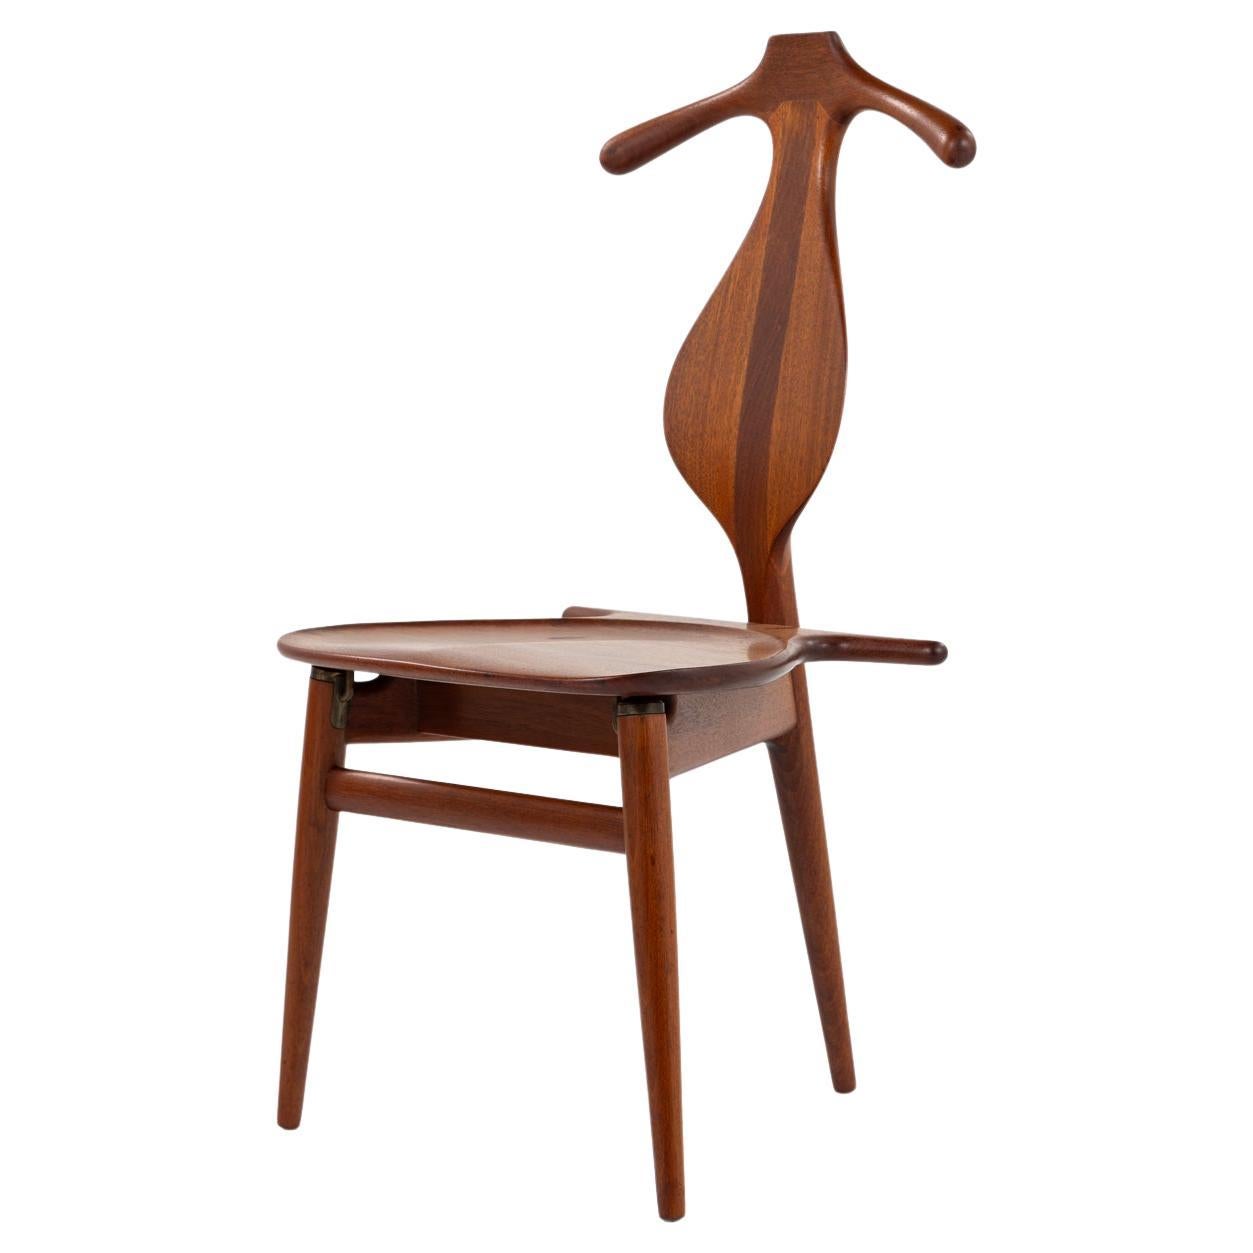 JH 540 - The Valet Chair in solid mahogany by Hans Wegner